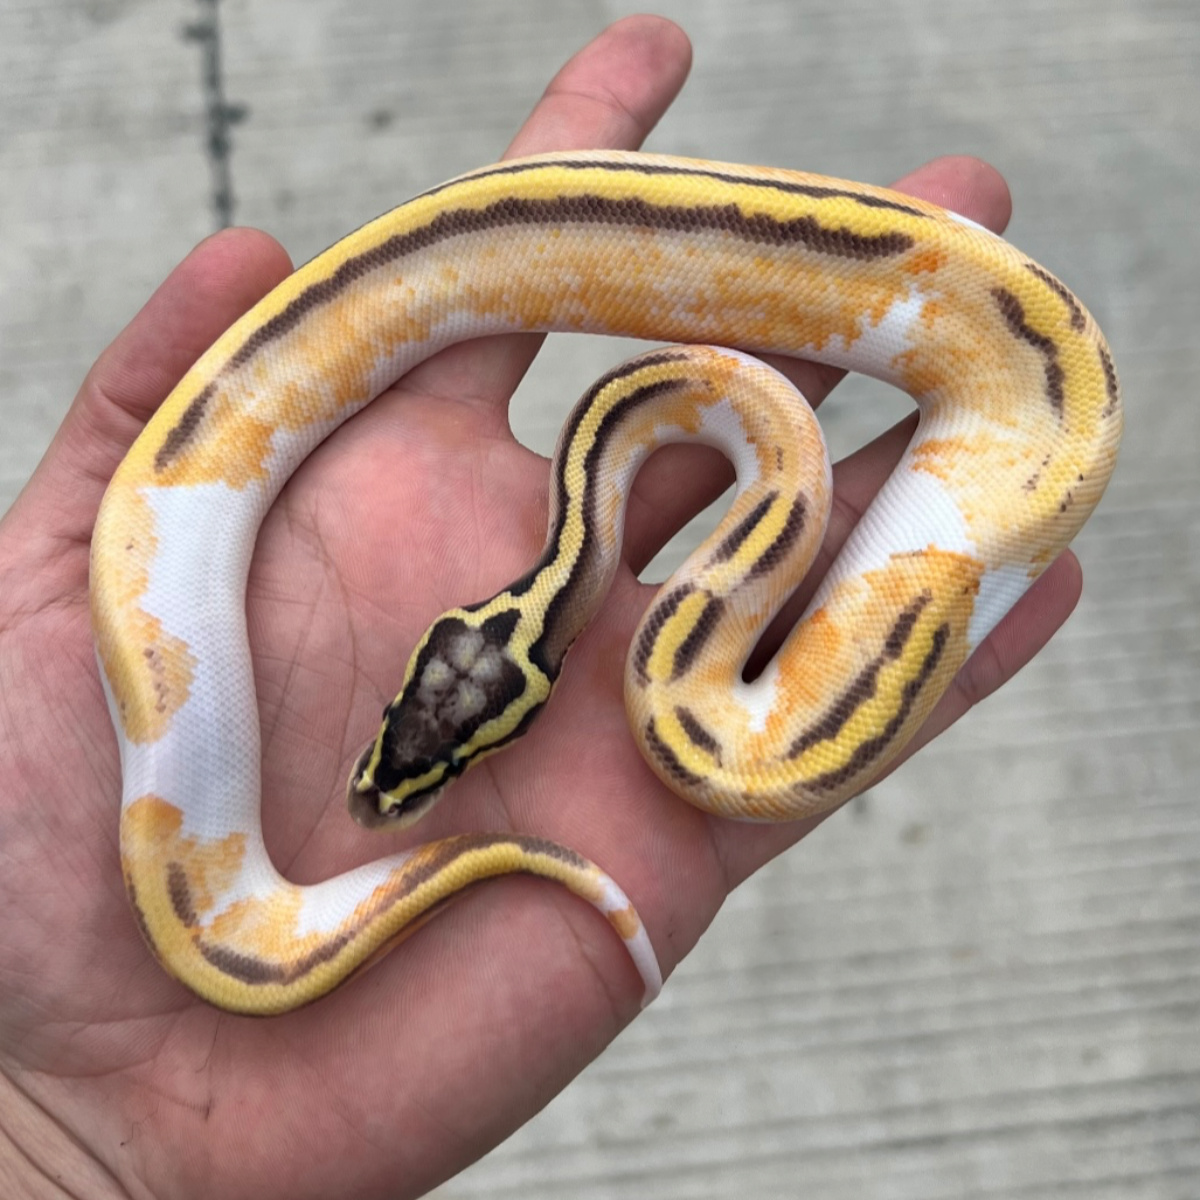 ball python pied yellowbelly super pastel